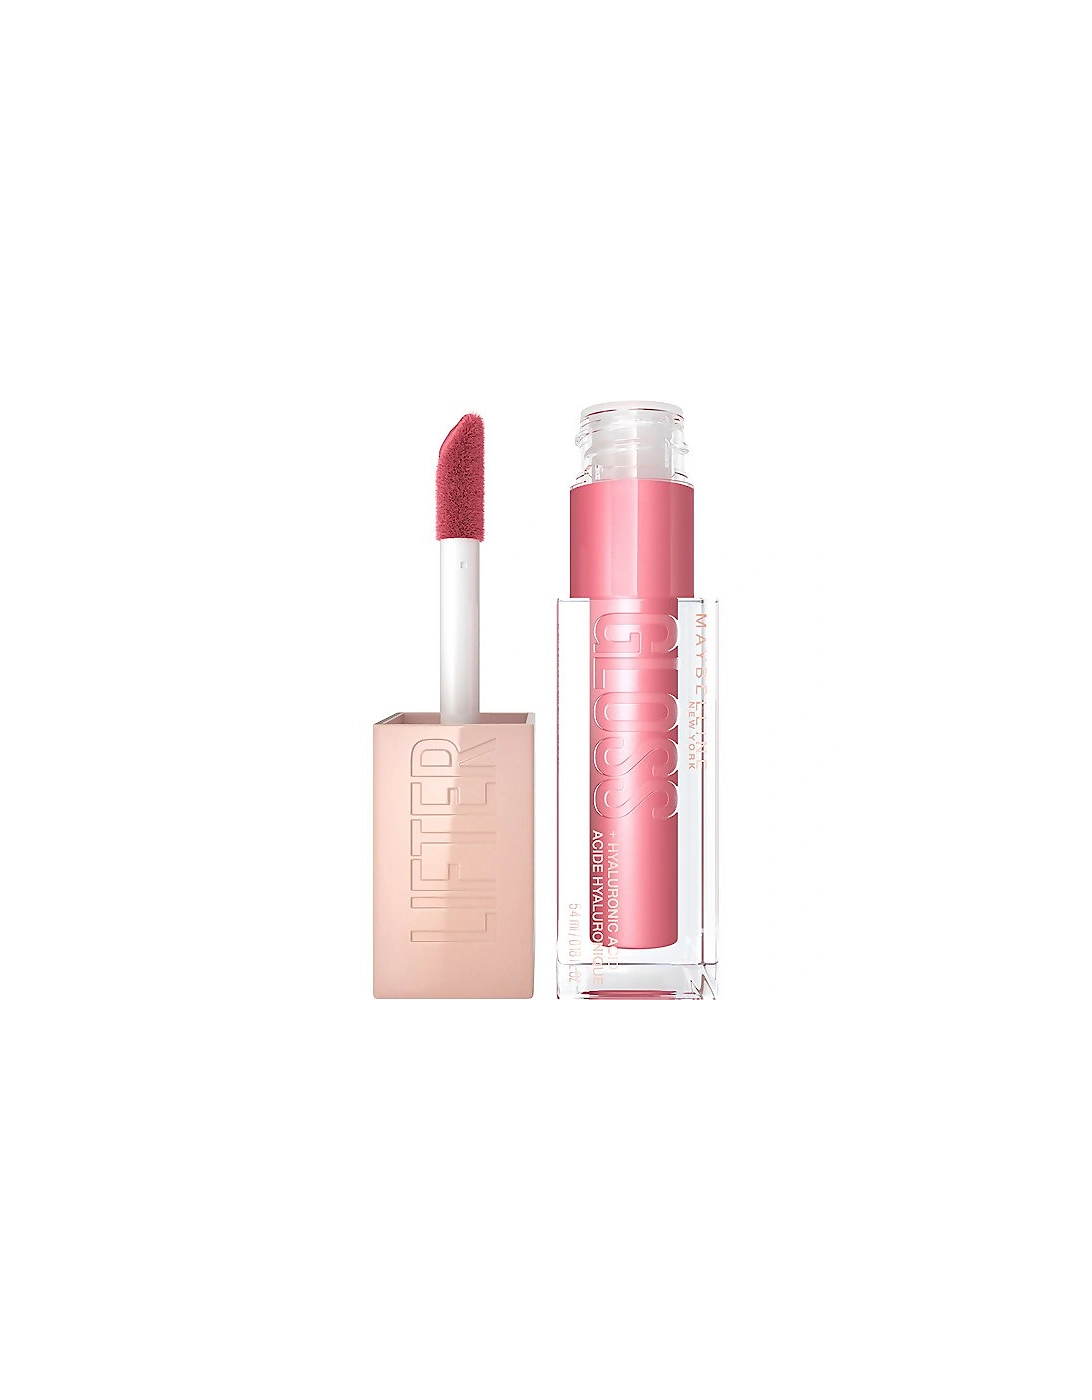 Lifter Gloss Hydrating Lip Gloss with Hyaluronic Acid 005 Petal, 2 of 1